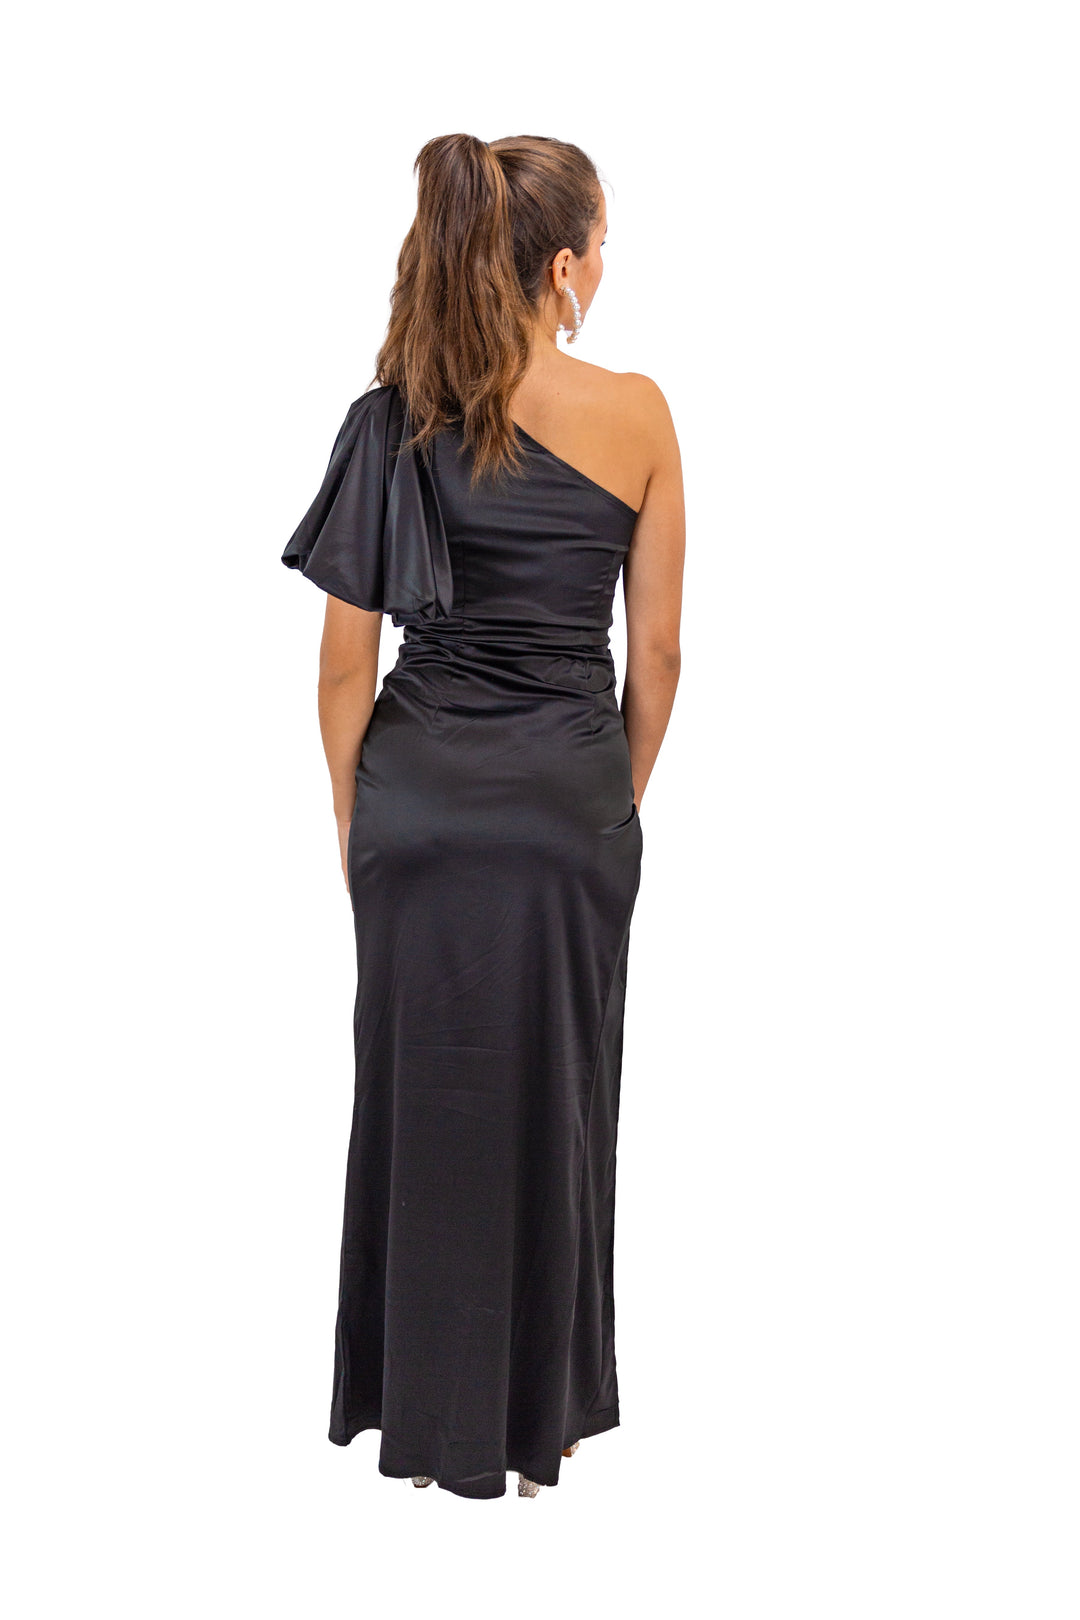 Black One-Shoulder Maxi Dress With Thigh Slit